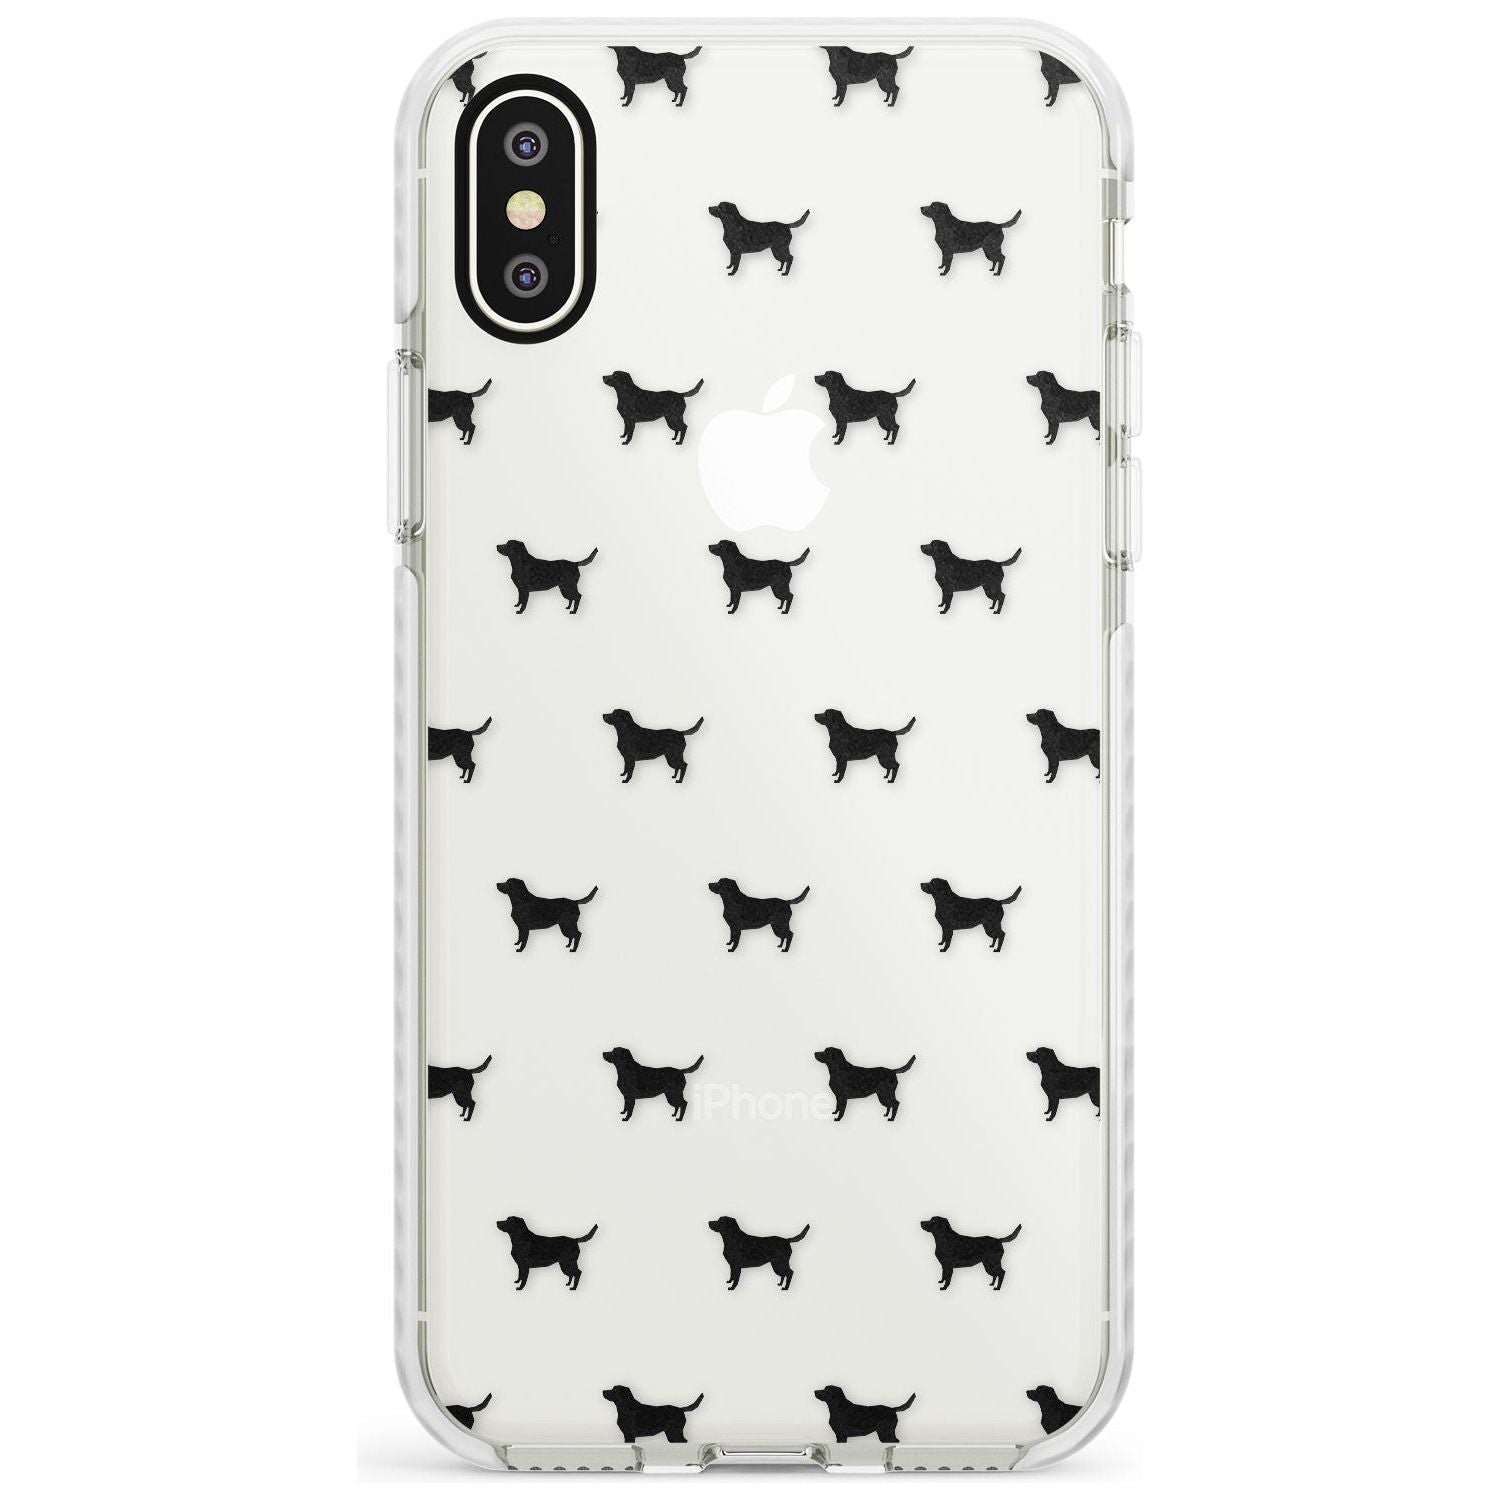 Black Labrador Dog Pattern Clear Impact Phone Case for iPhone X XS Max XR